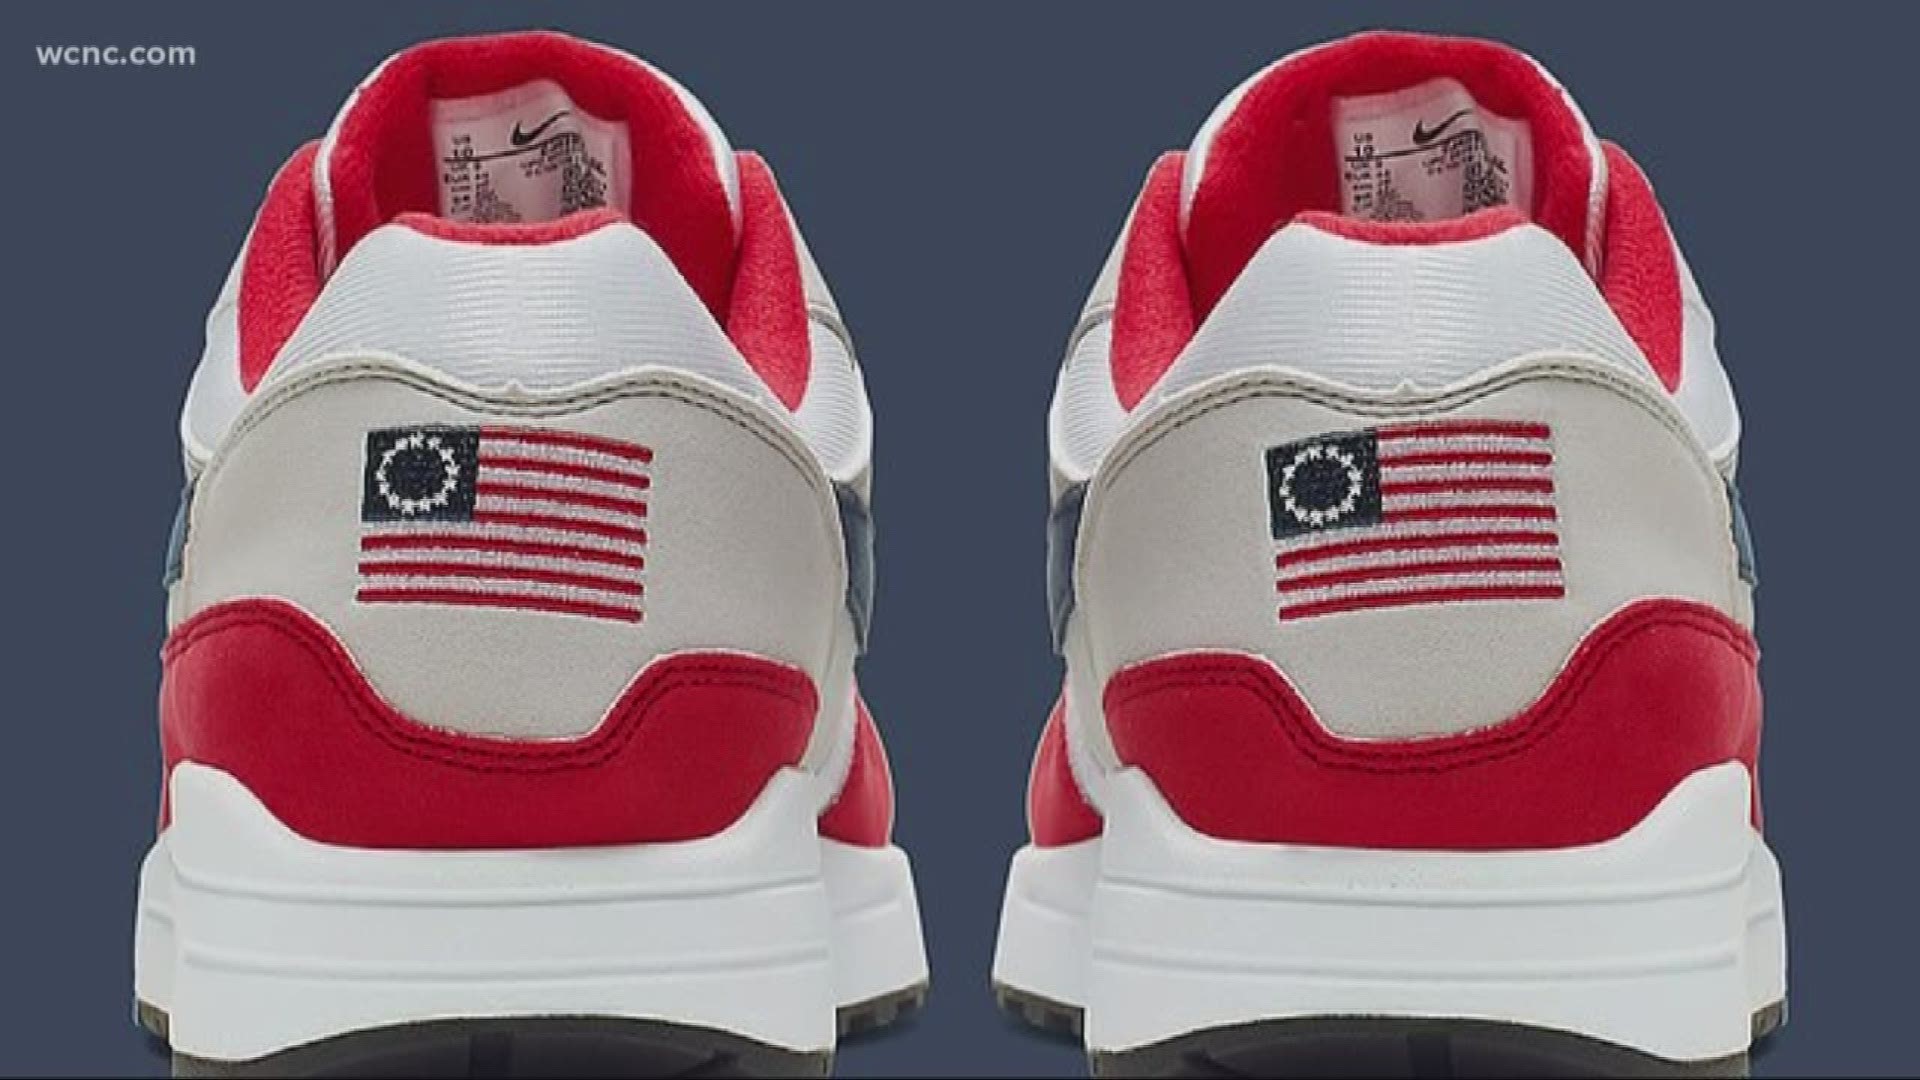 Nike announced they are scrapping plans to release a special Fourth of July Air Max 1 sneaker after athlete Colin Kaepernick said the flag could be seen as offensive because of its association with slavery.